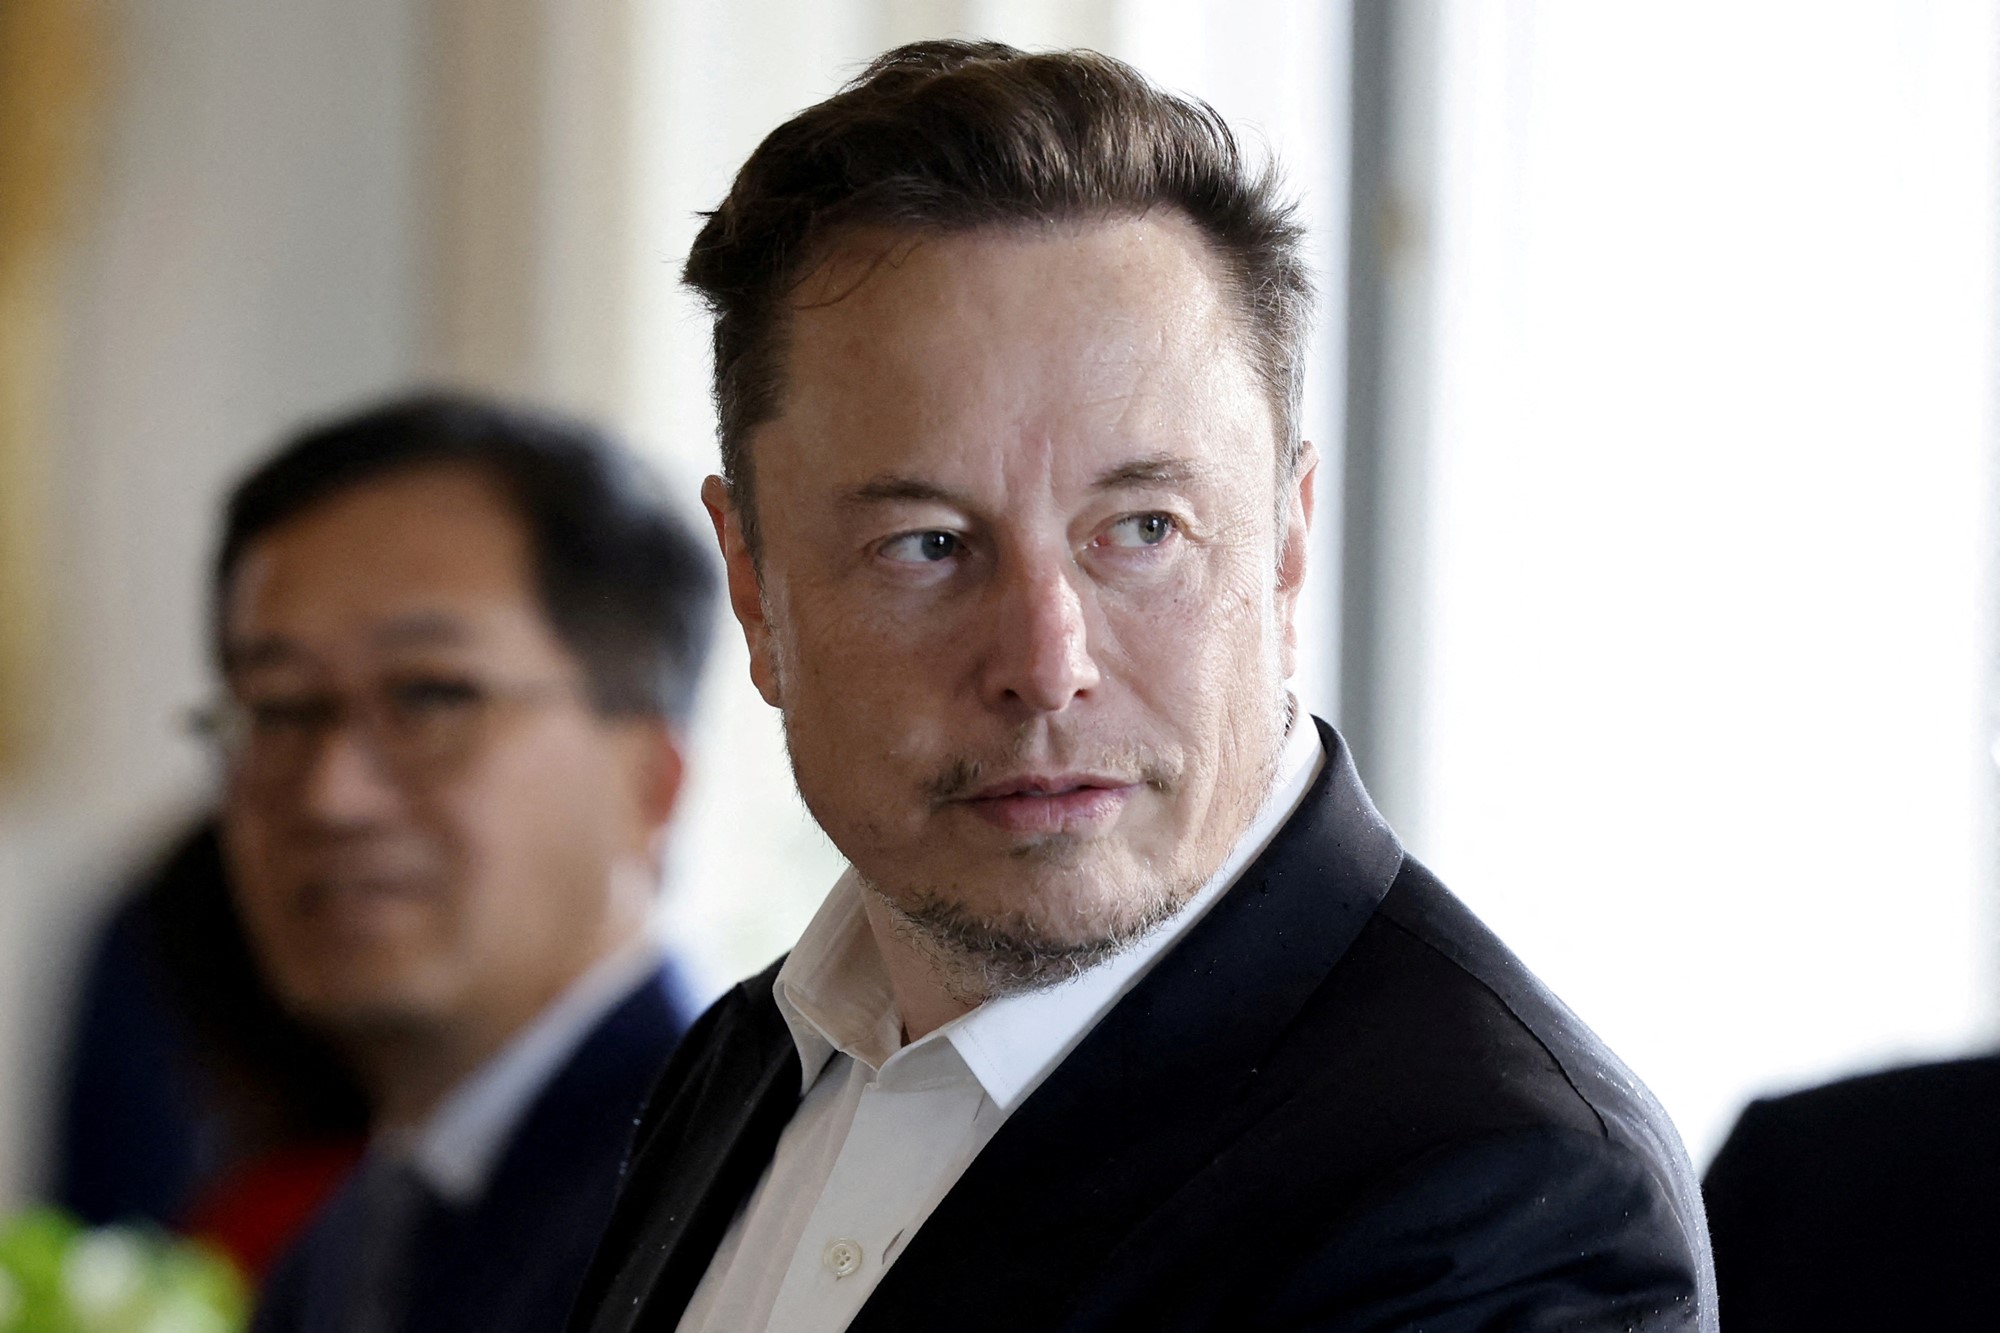 Elon Musk sits next to a man, both in suits